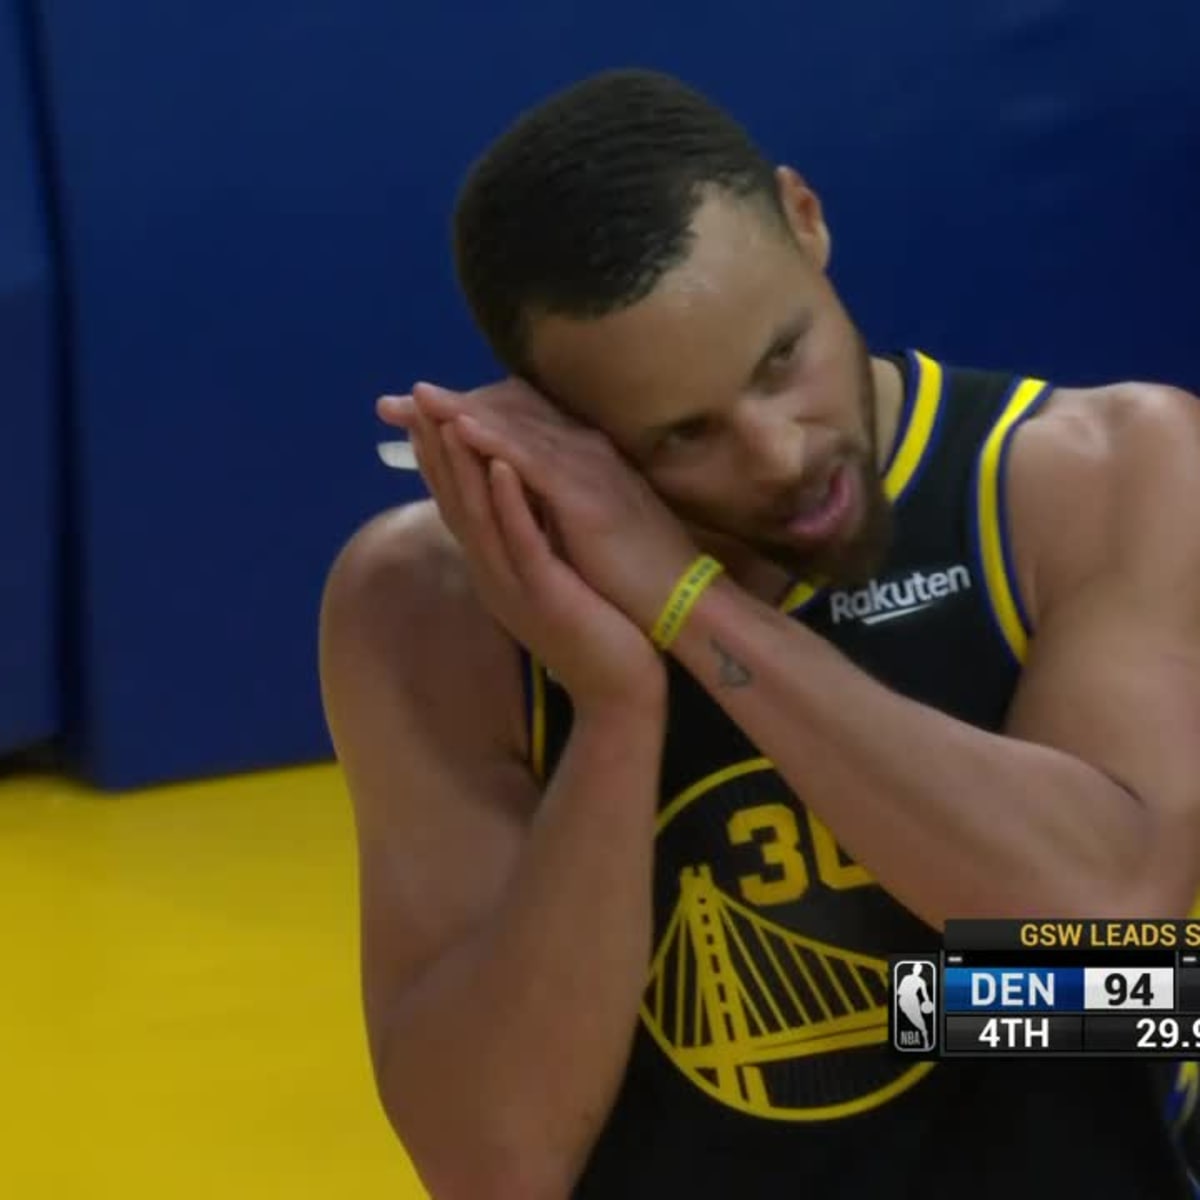 steph curry night night picture